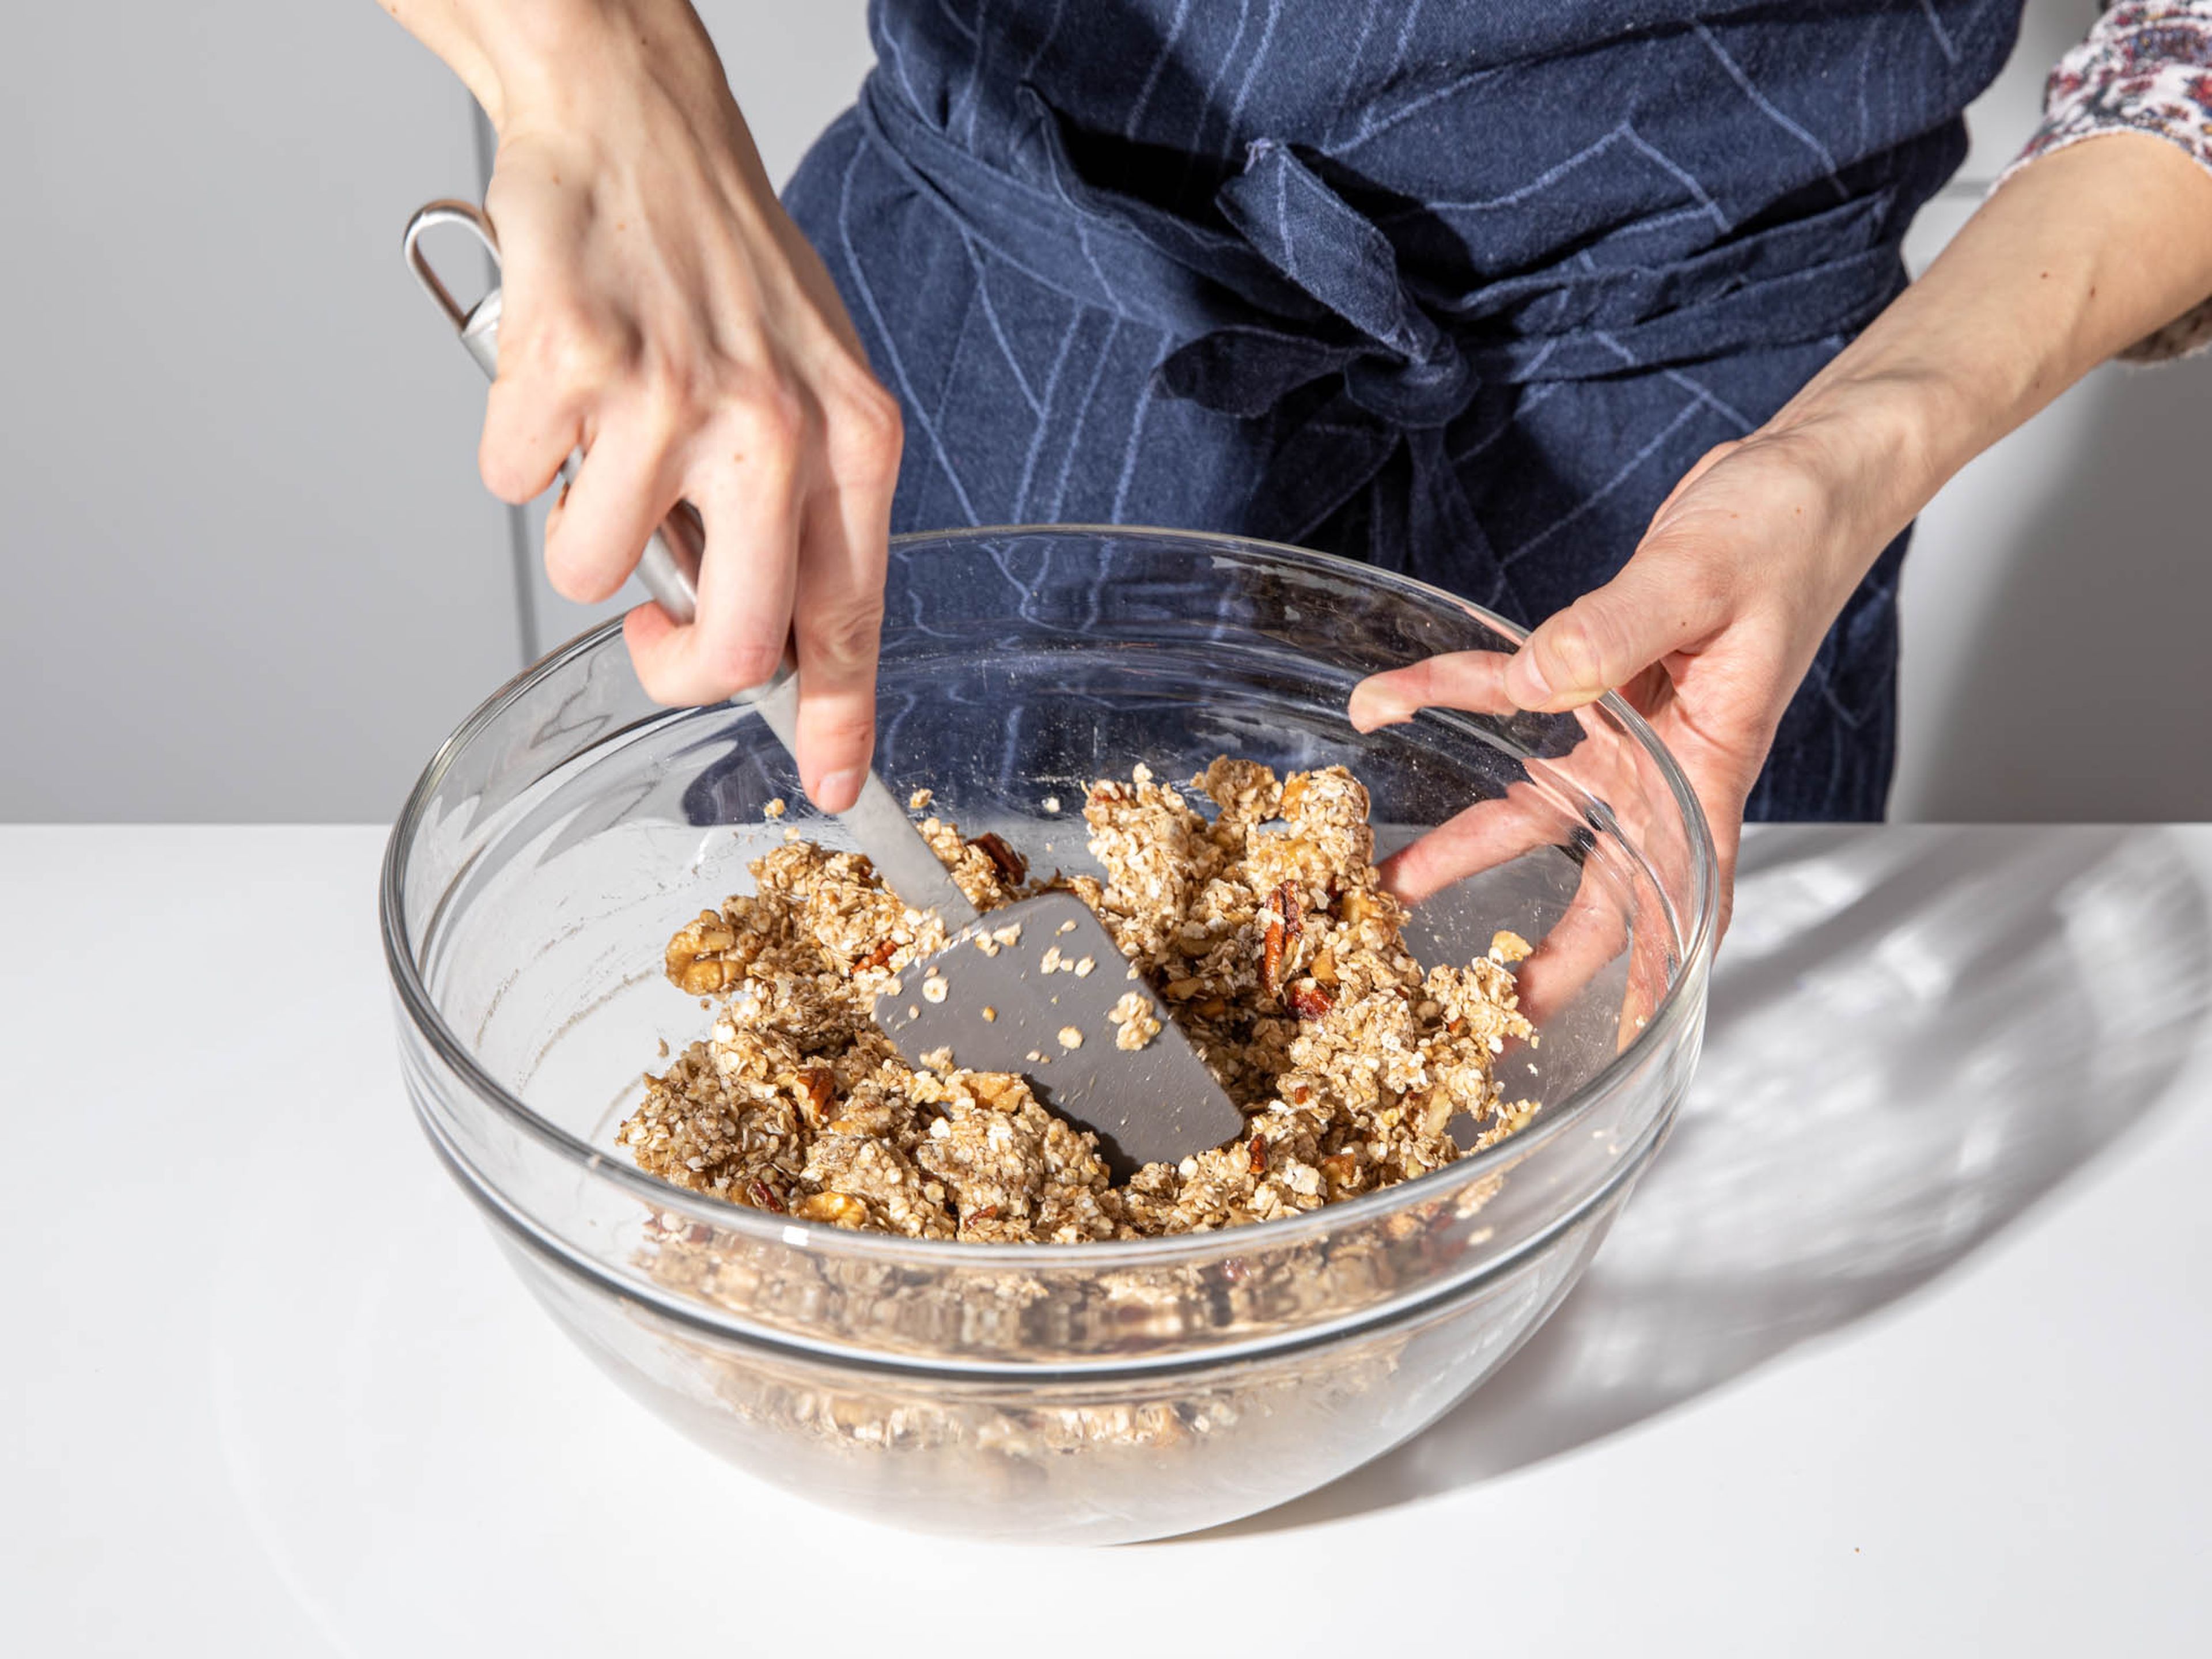 Add the maple syrup mixture to the bowl with oatmeal and nuts. Stir until everything is well combined and the oat flakes and nuts are evenly coated.